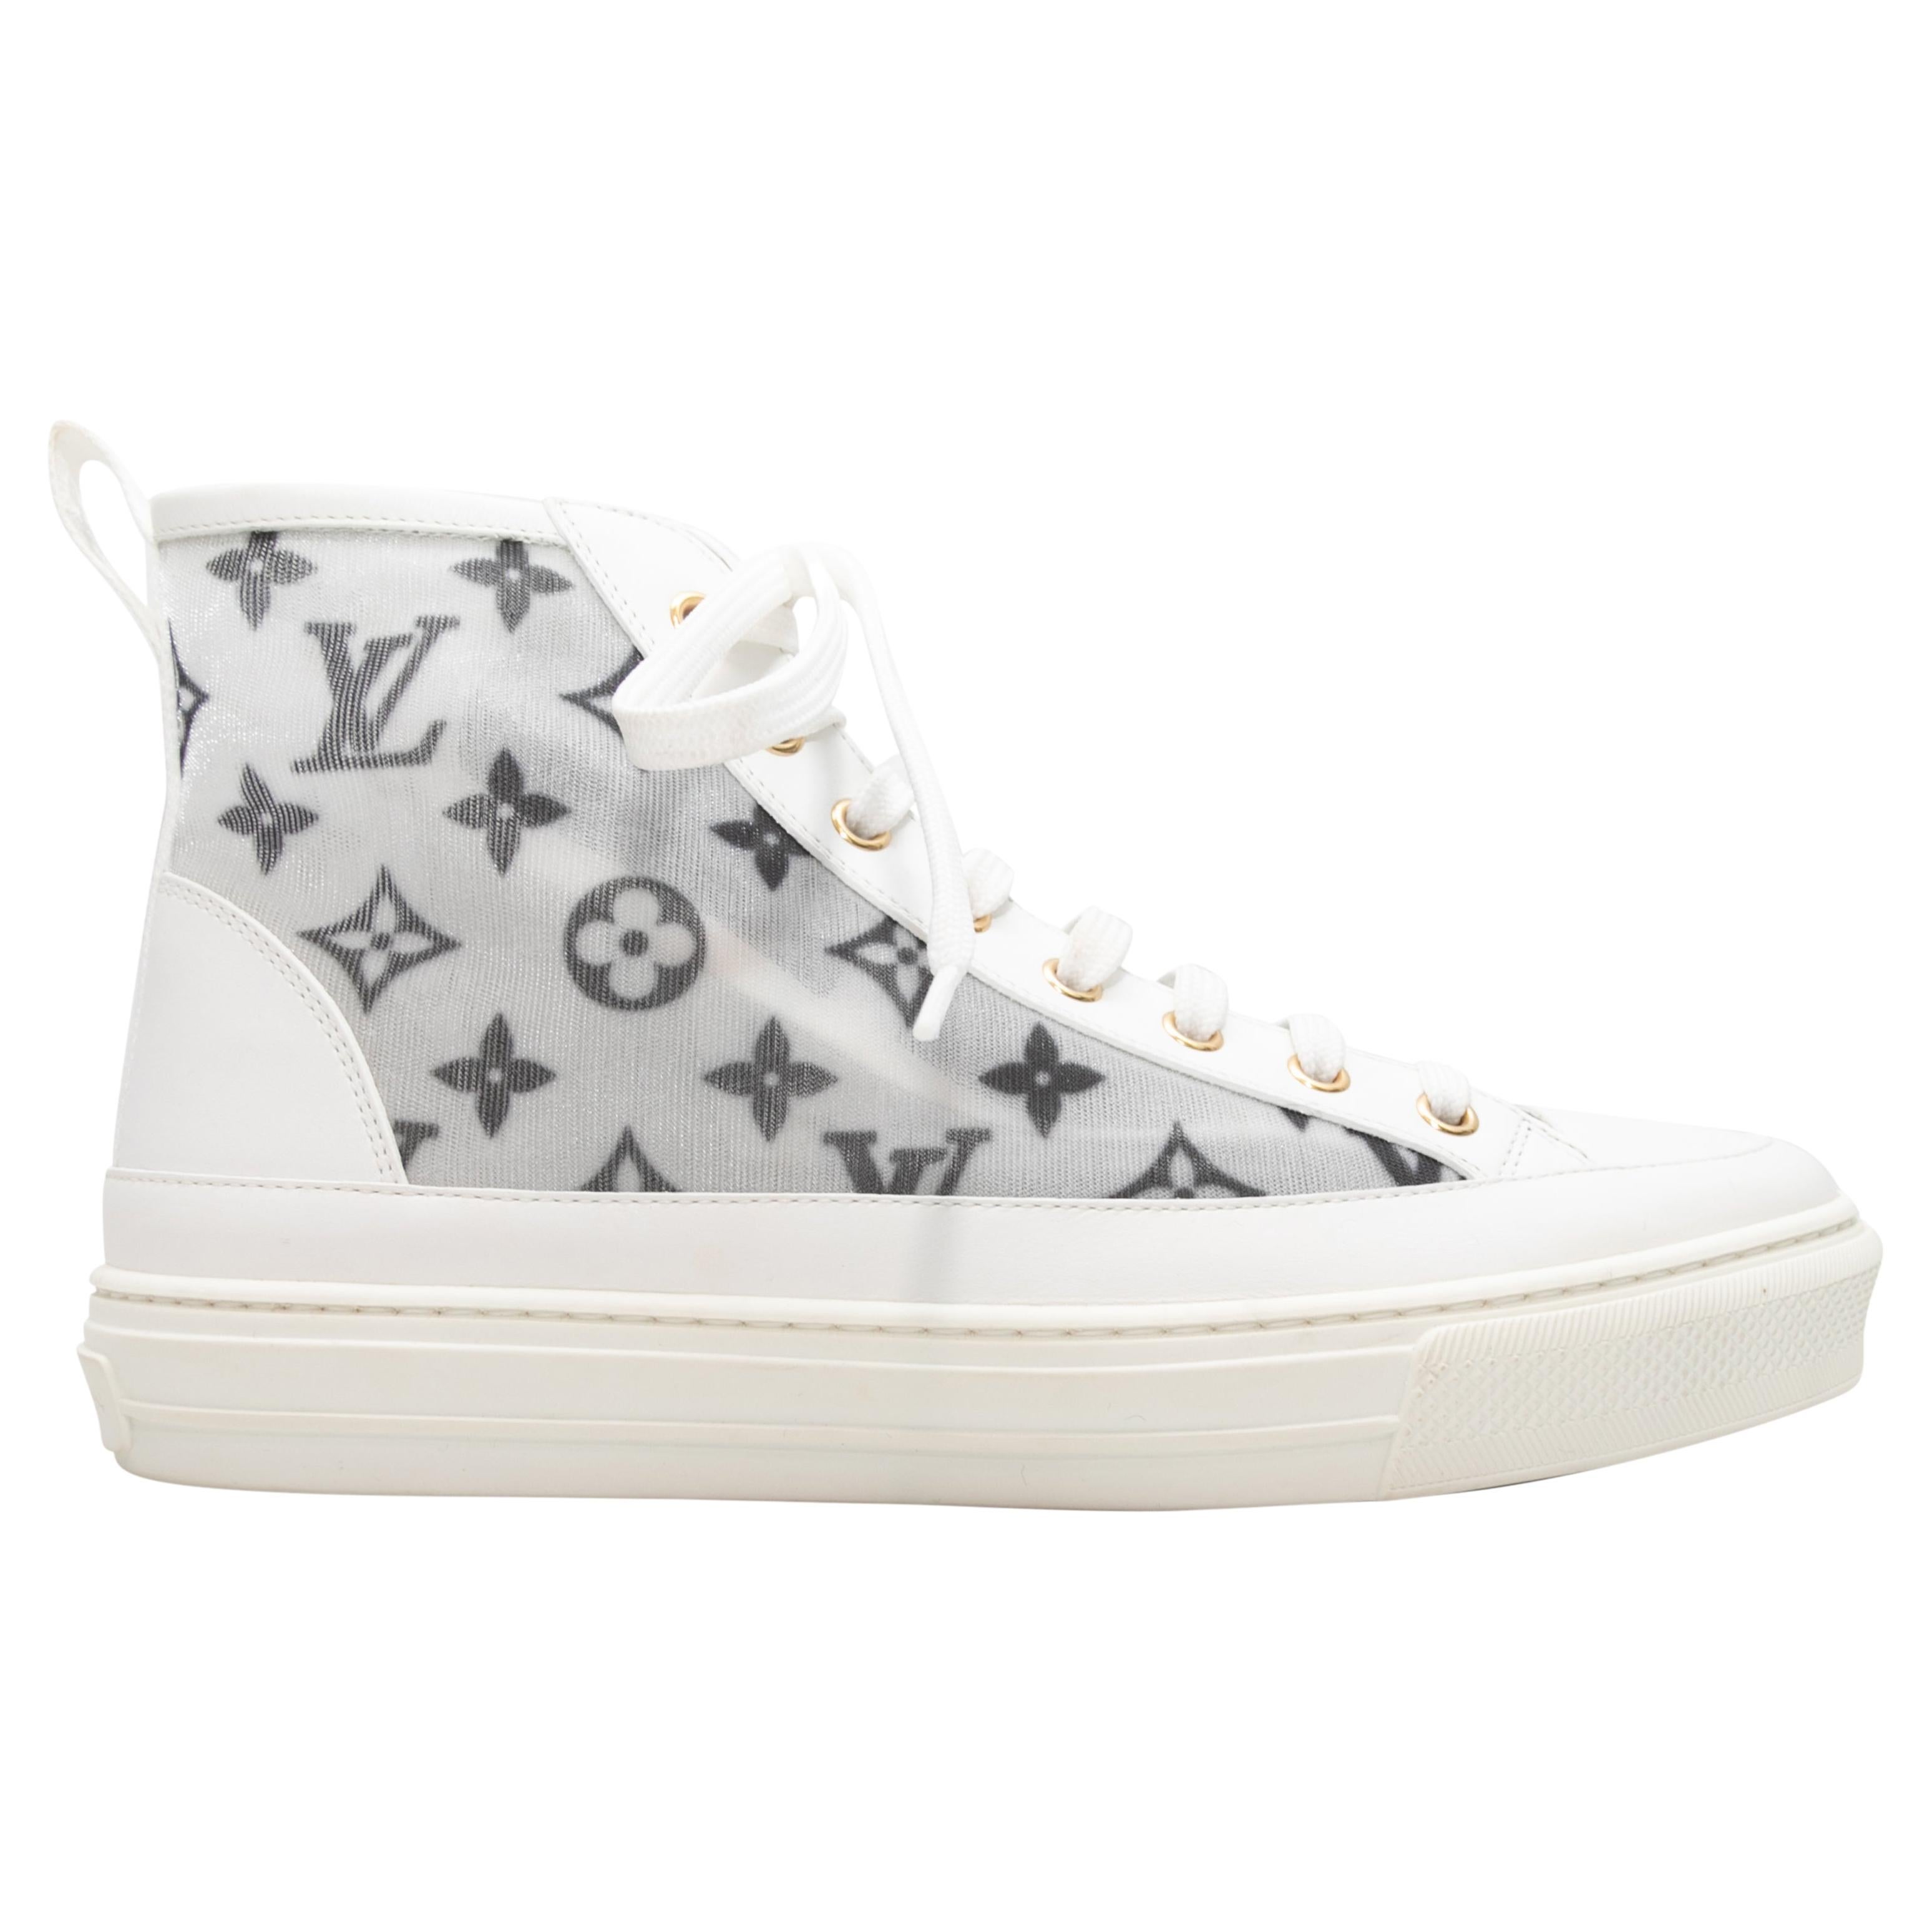 White & Black Louis Vuitton Monogram High-Top Sneakers Size 38 For Sale